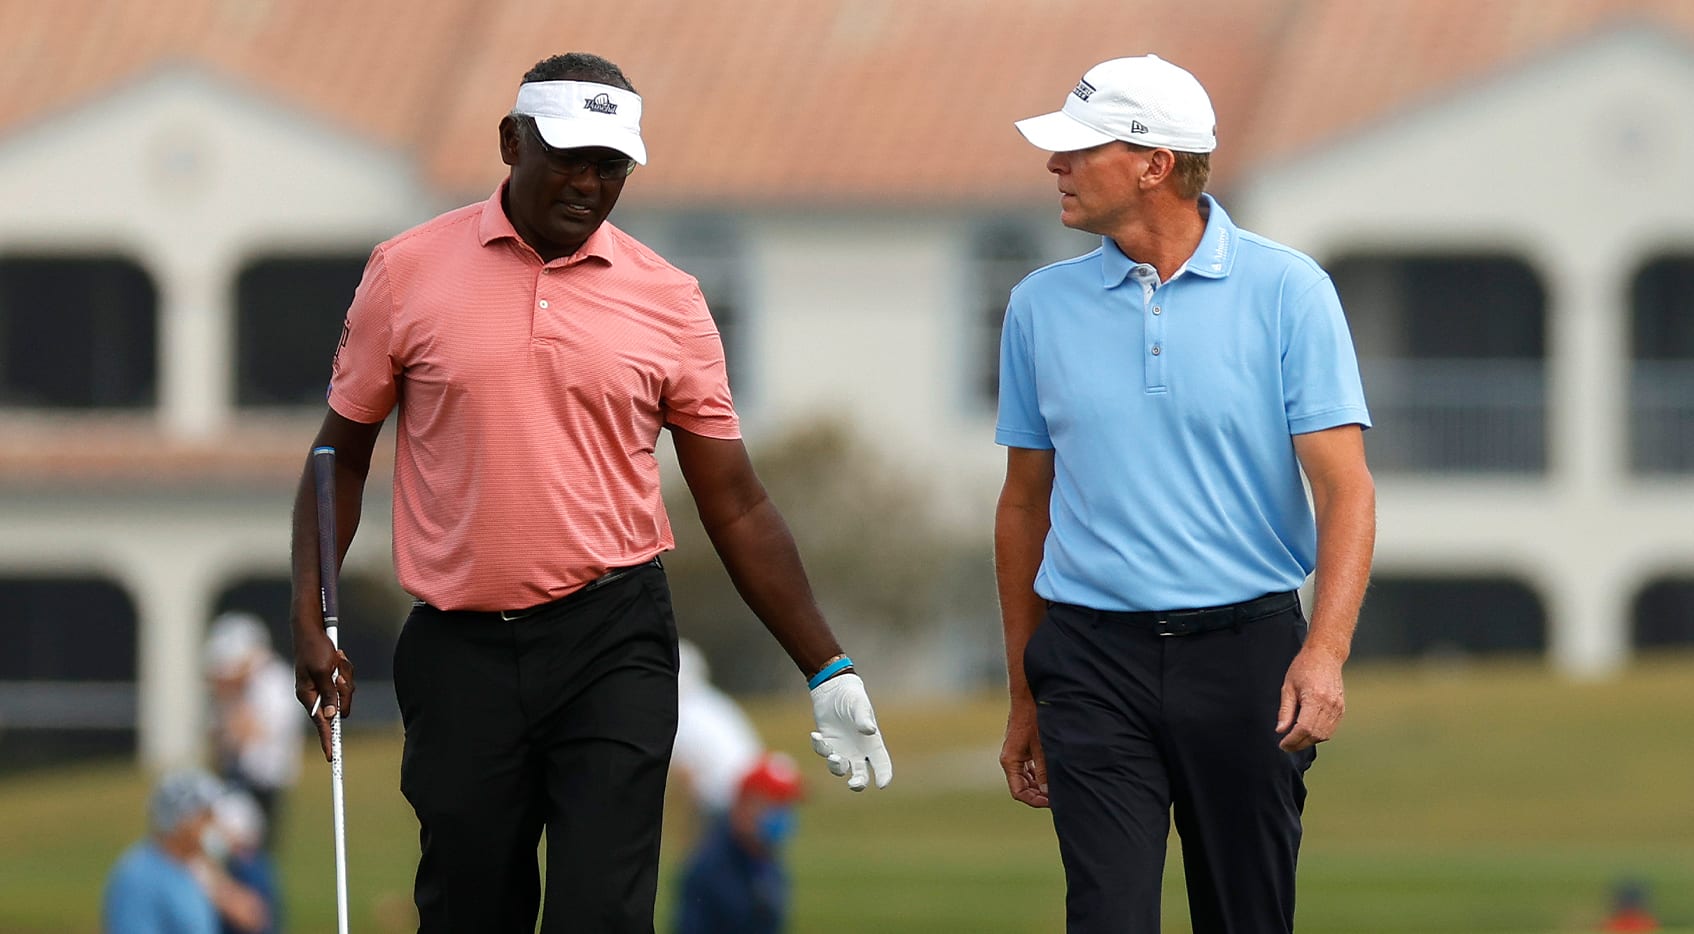 Vijay Singh, Bernhard Langer and Steve Stricker announced as automatic qualifiers for inaugural World Champions Cup